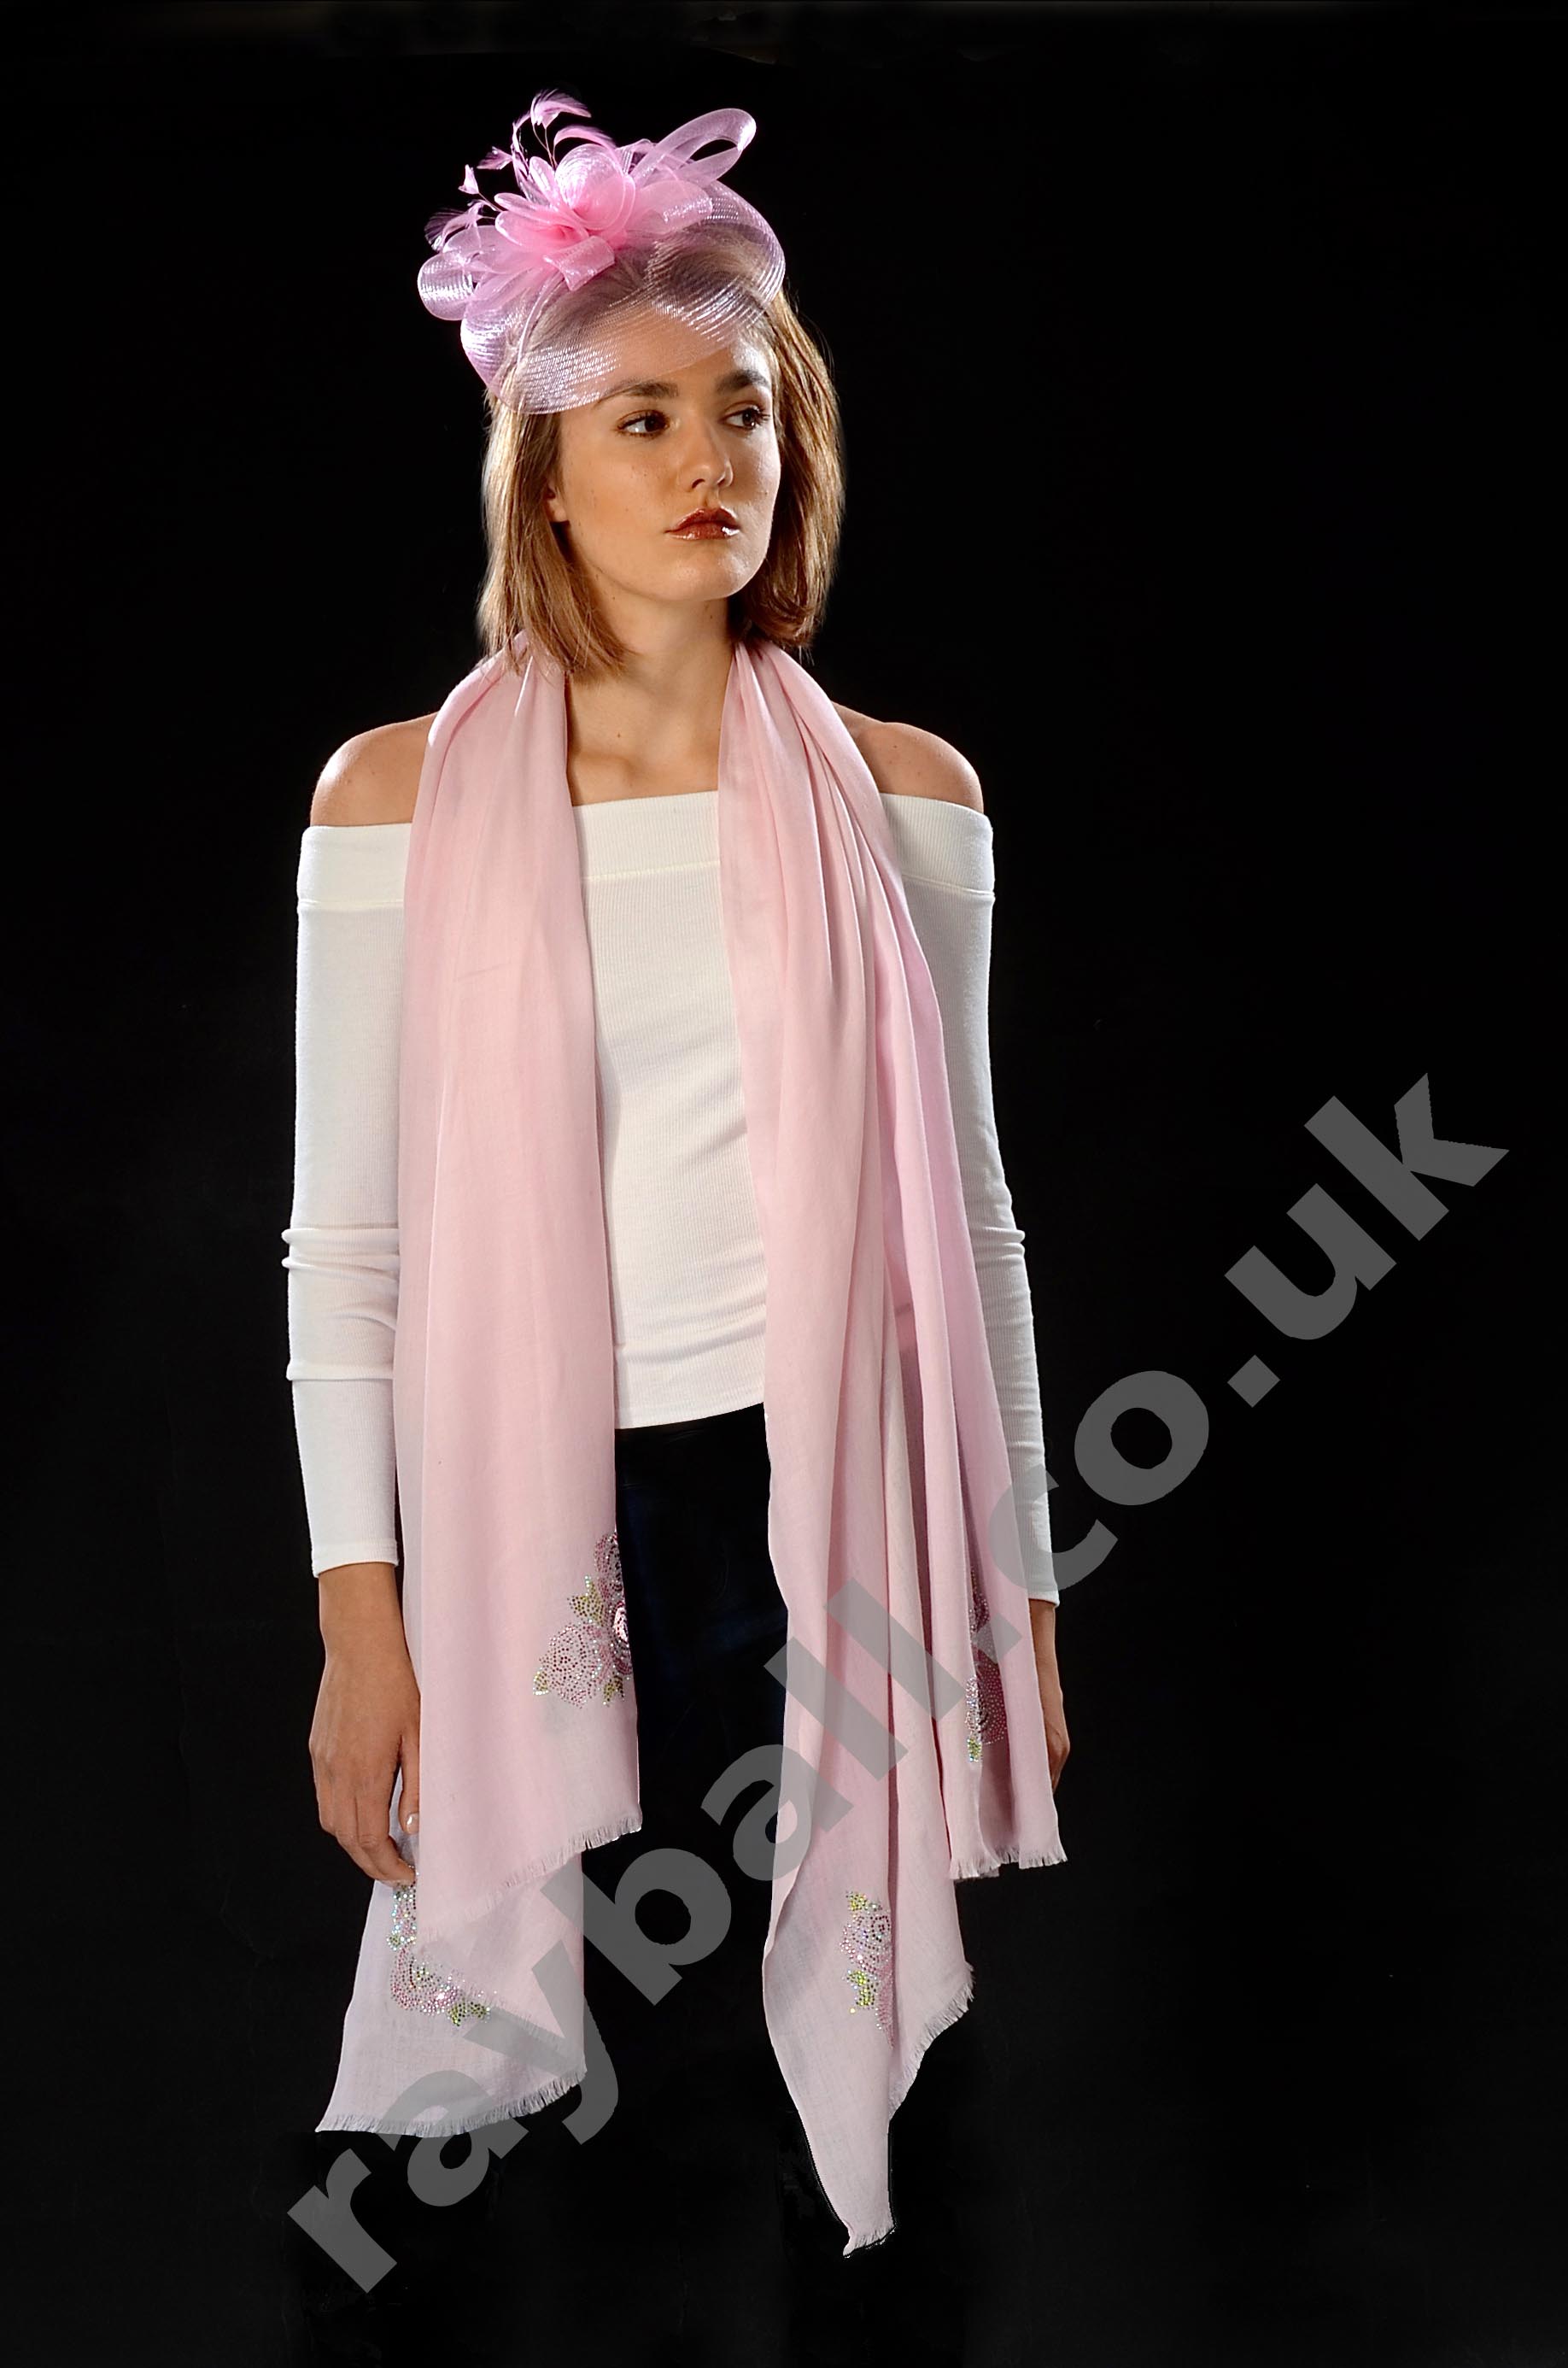 Fetcham model in pink accessories at Epsom Photography Studio Surrey.